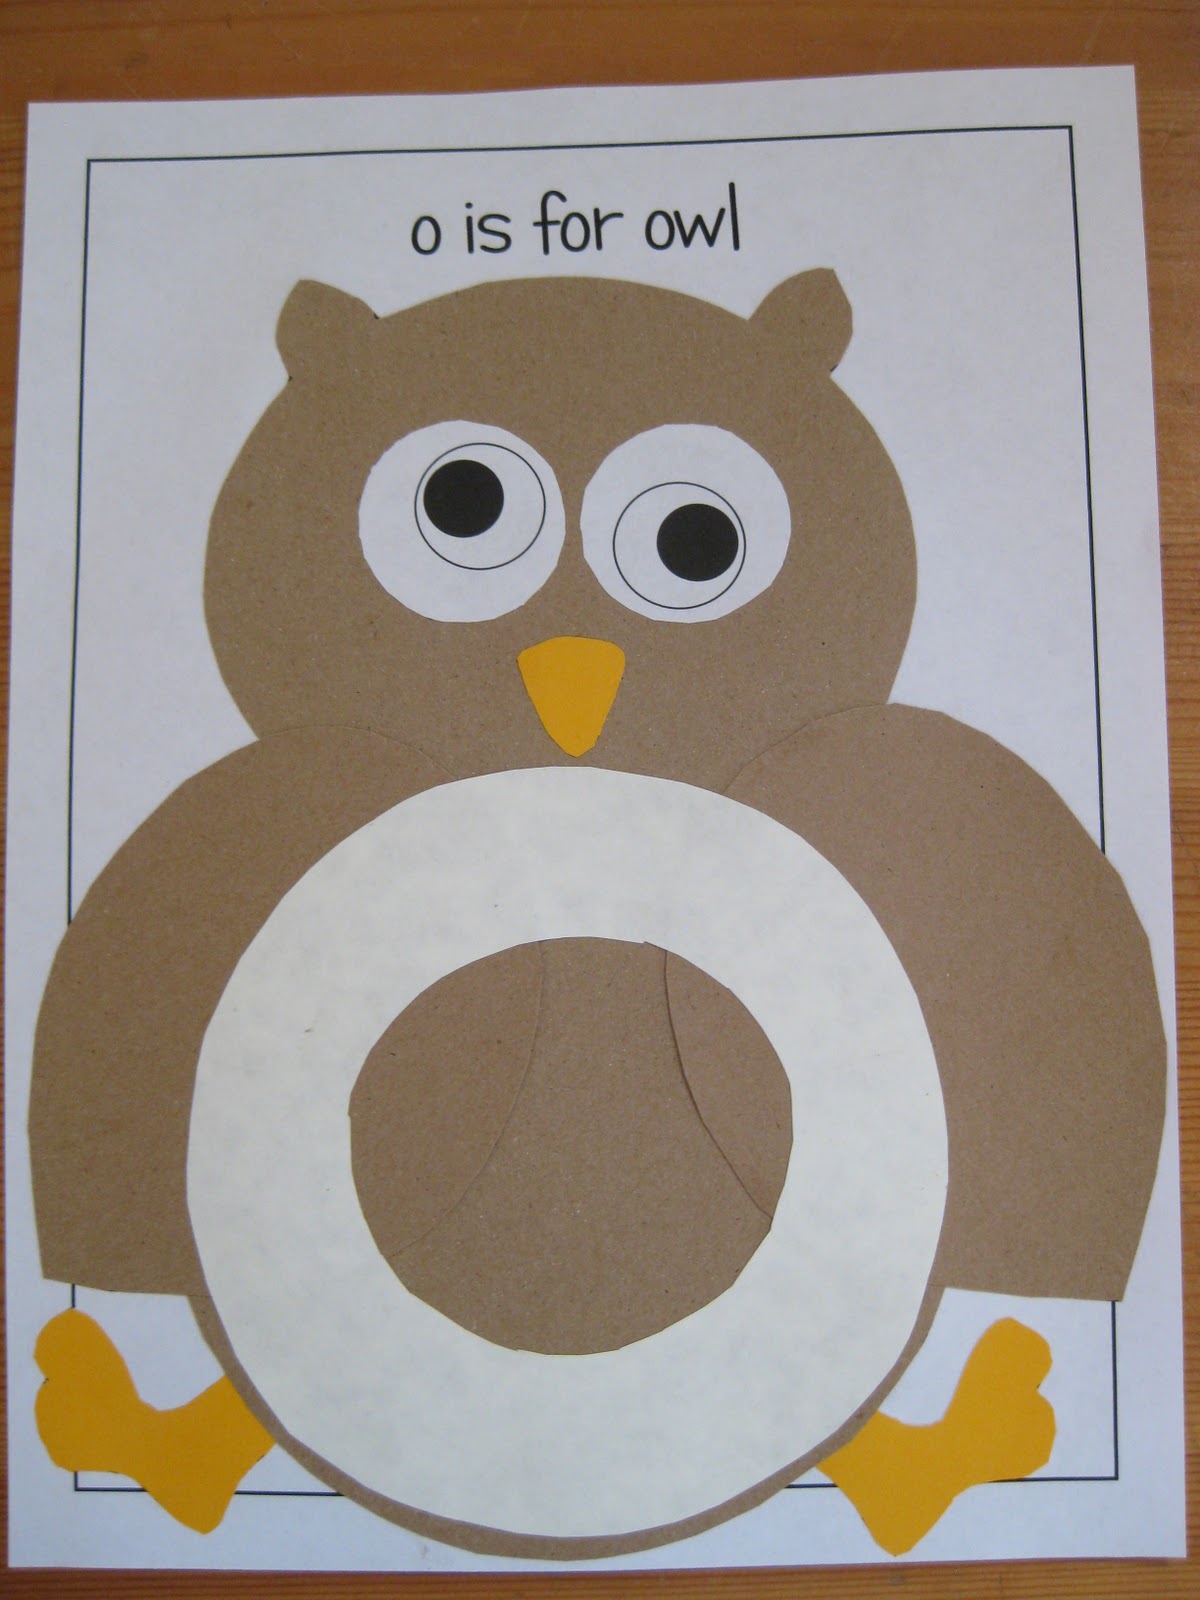 lilliput-station-o-is-for-owl-free-printable